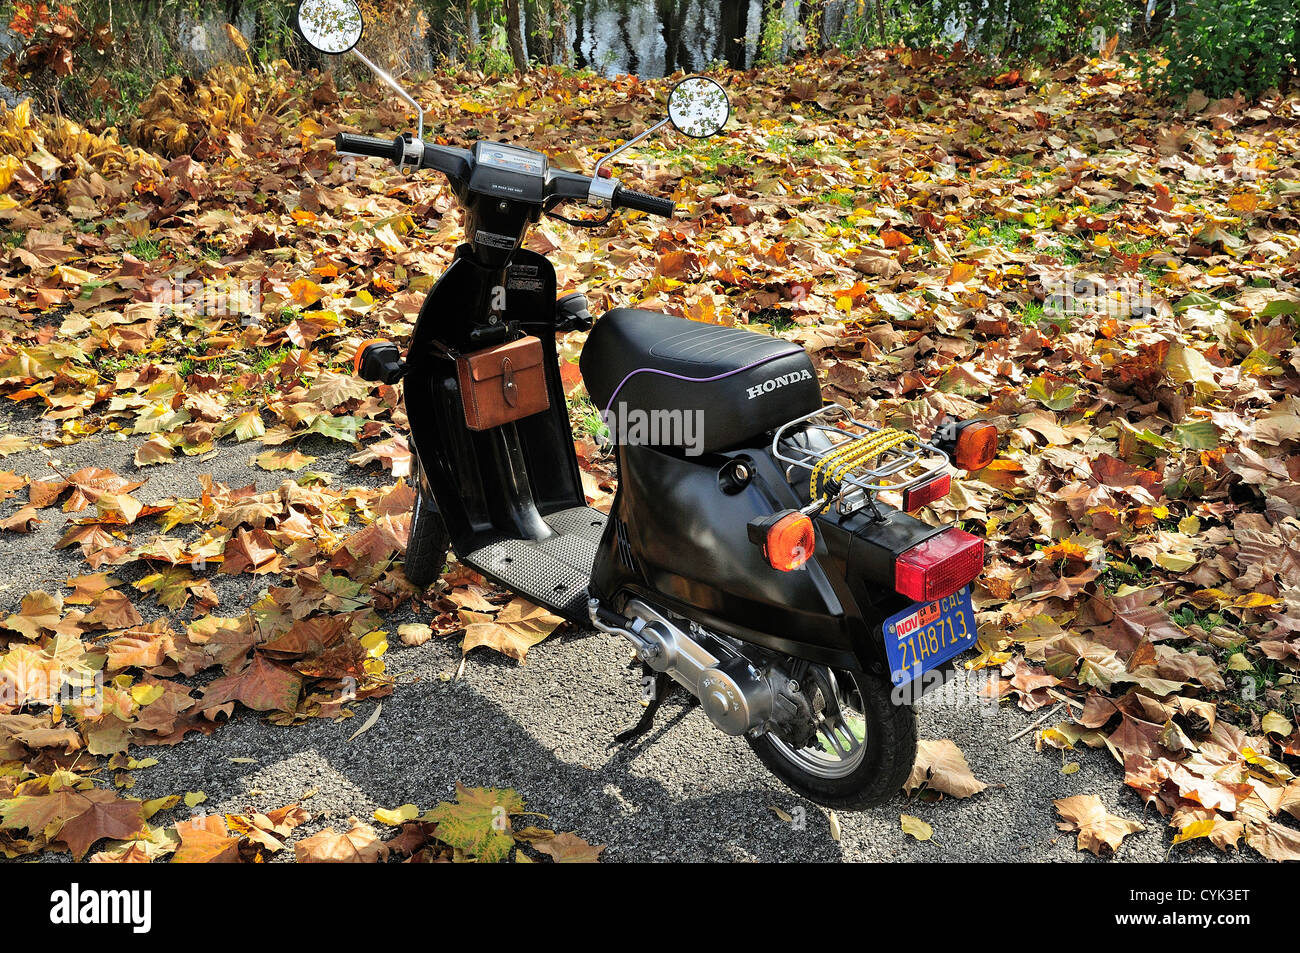 1986 Honda Spree scooter parked in autumn. Stock Photo